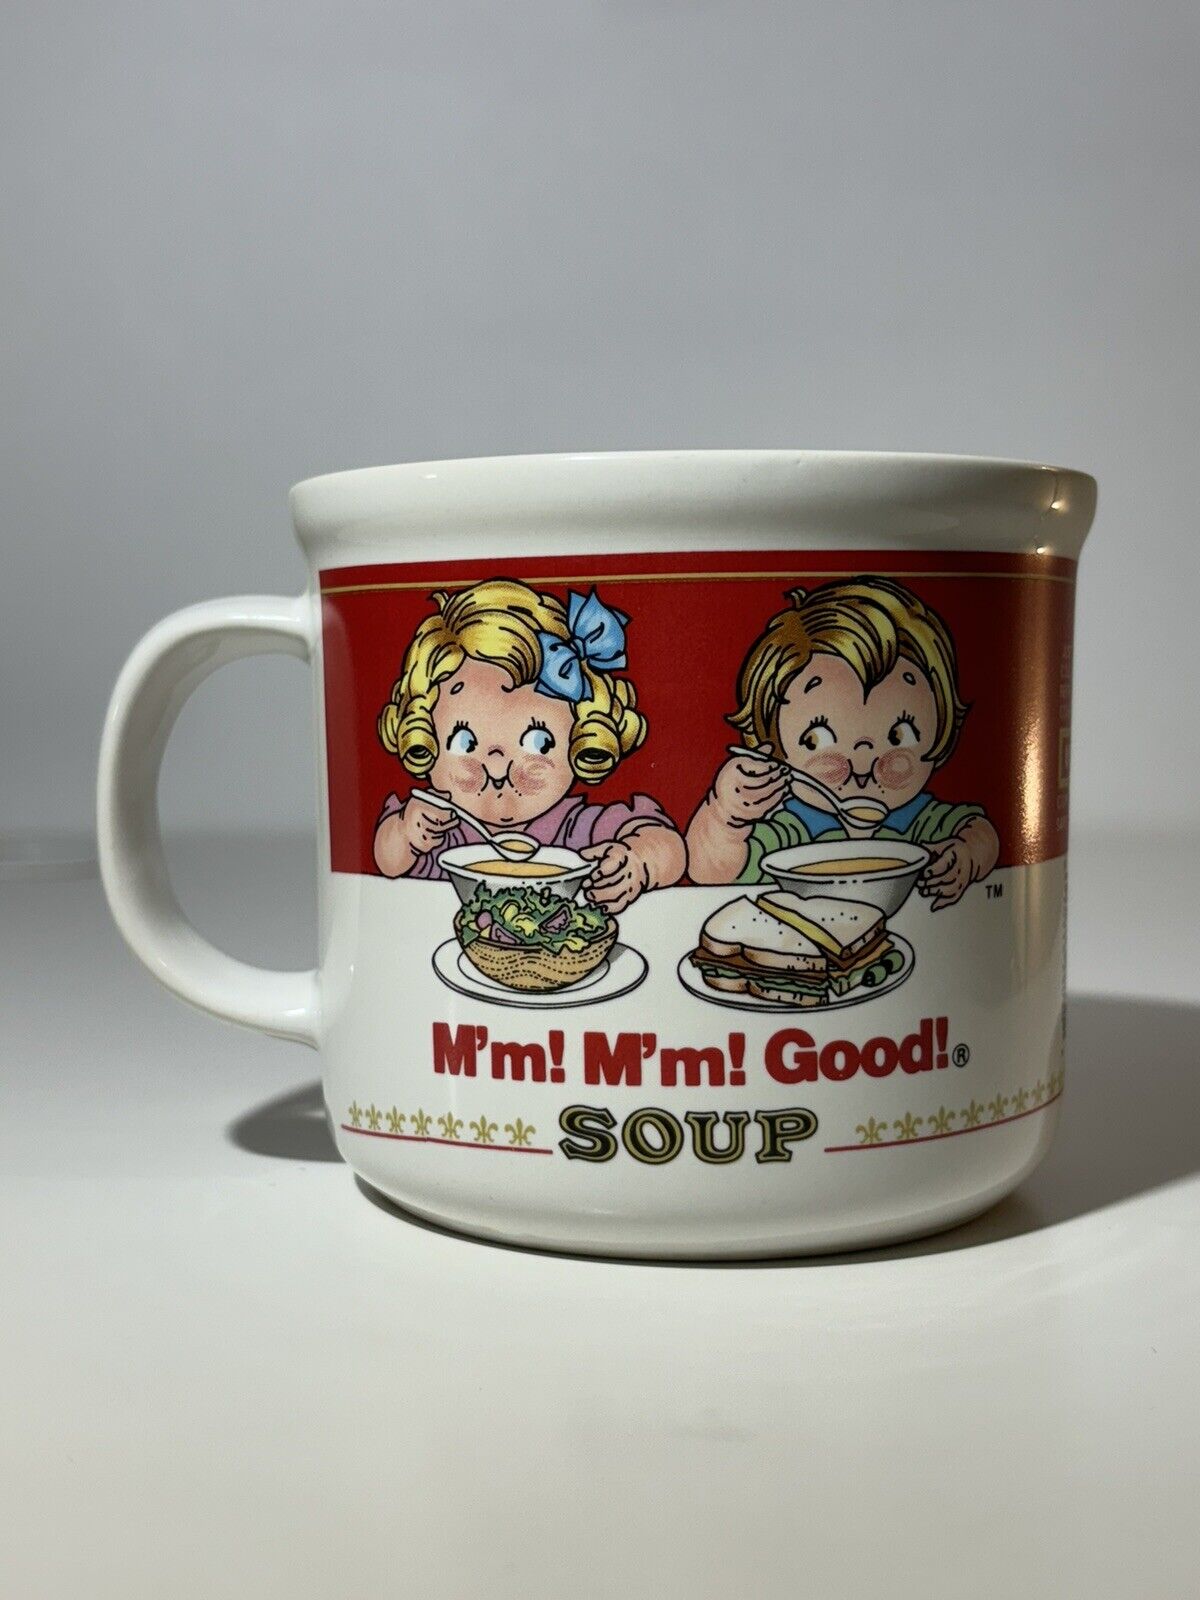 Vintage 1989 Campbell's Kids Ceramic Coffee Cup/mug. Soup Cup Advertisement